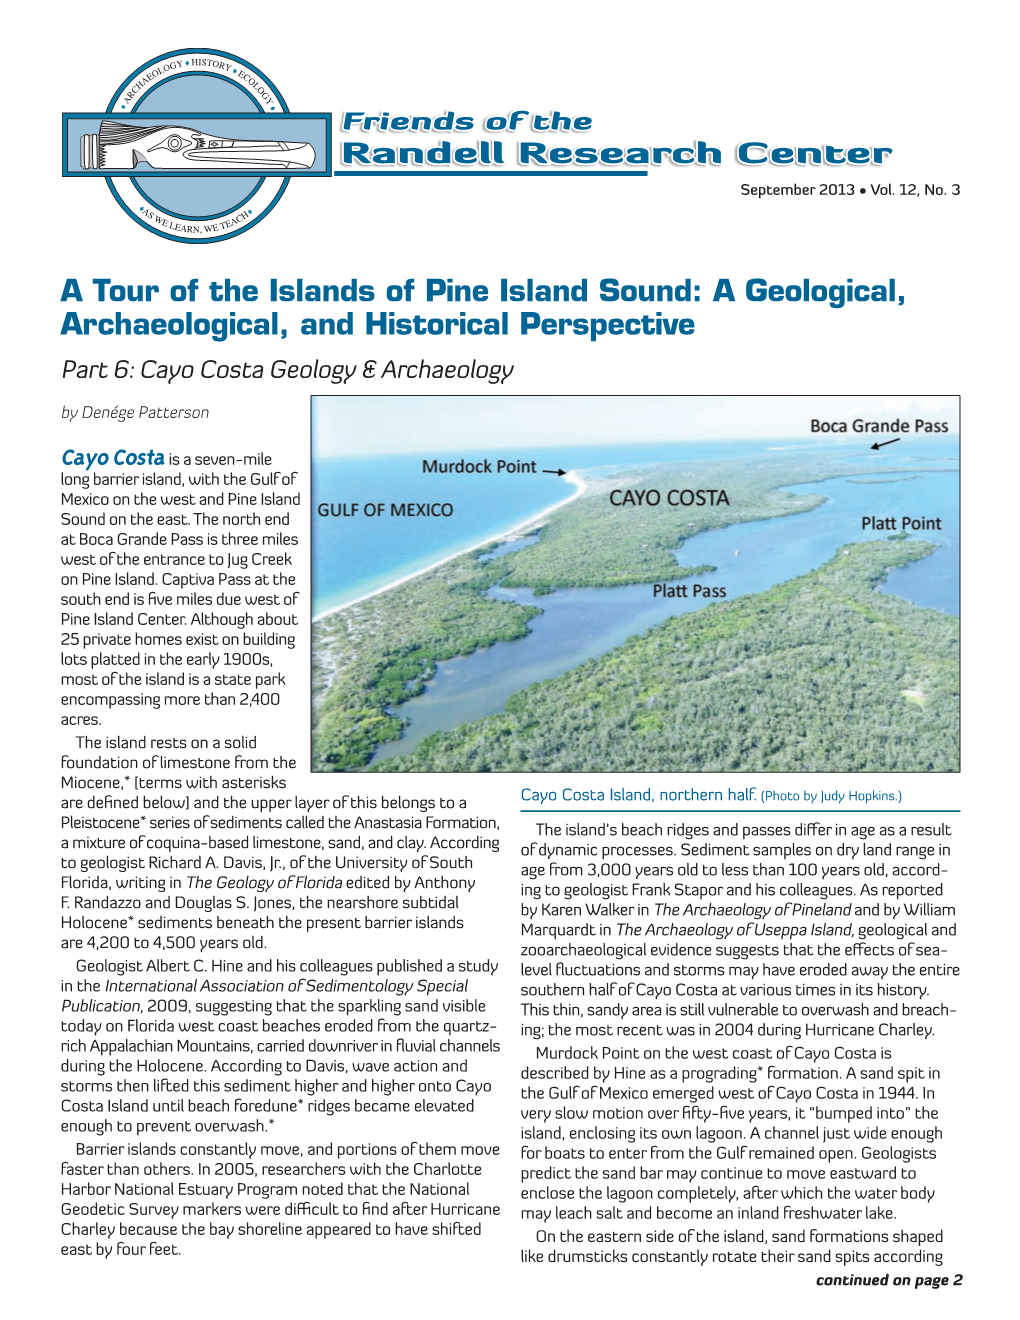 A Geological, Archaeological, and Historical Perspective Part 6: Cayo Costa Geology & Archaeology by Denége Patterson